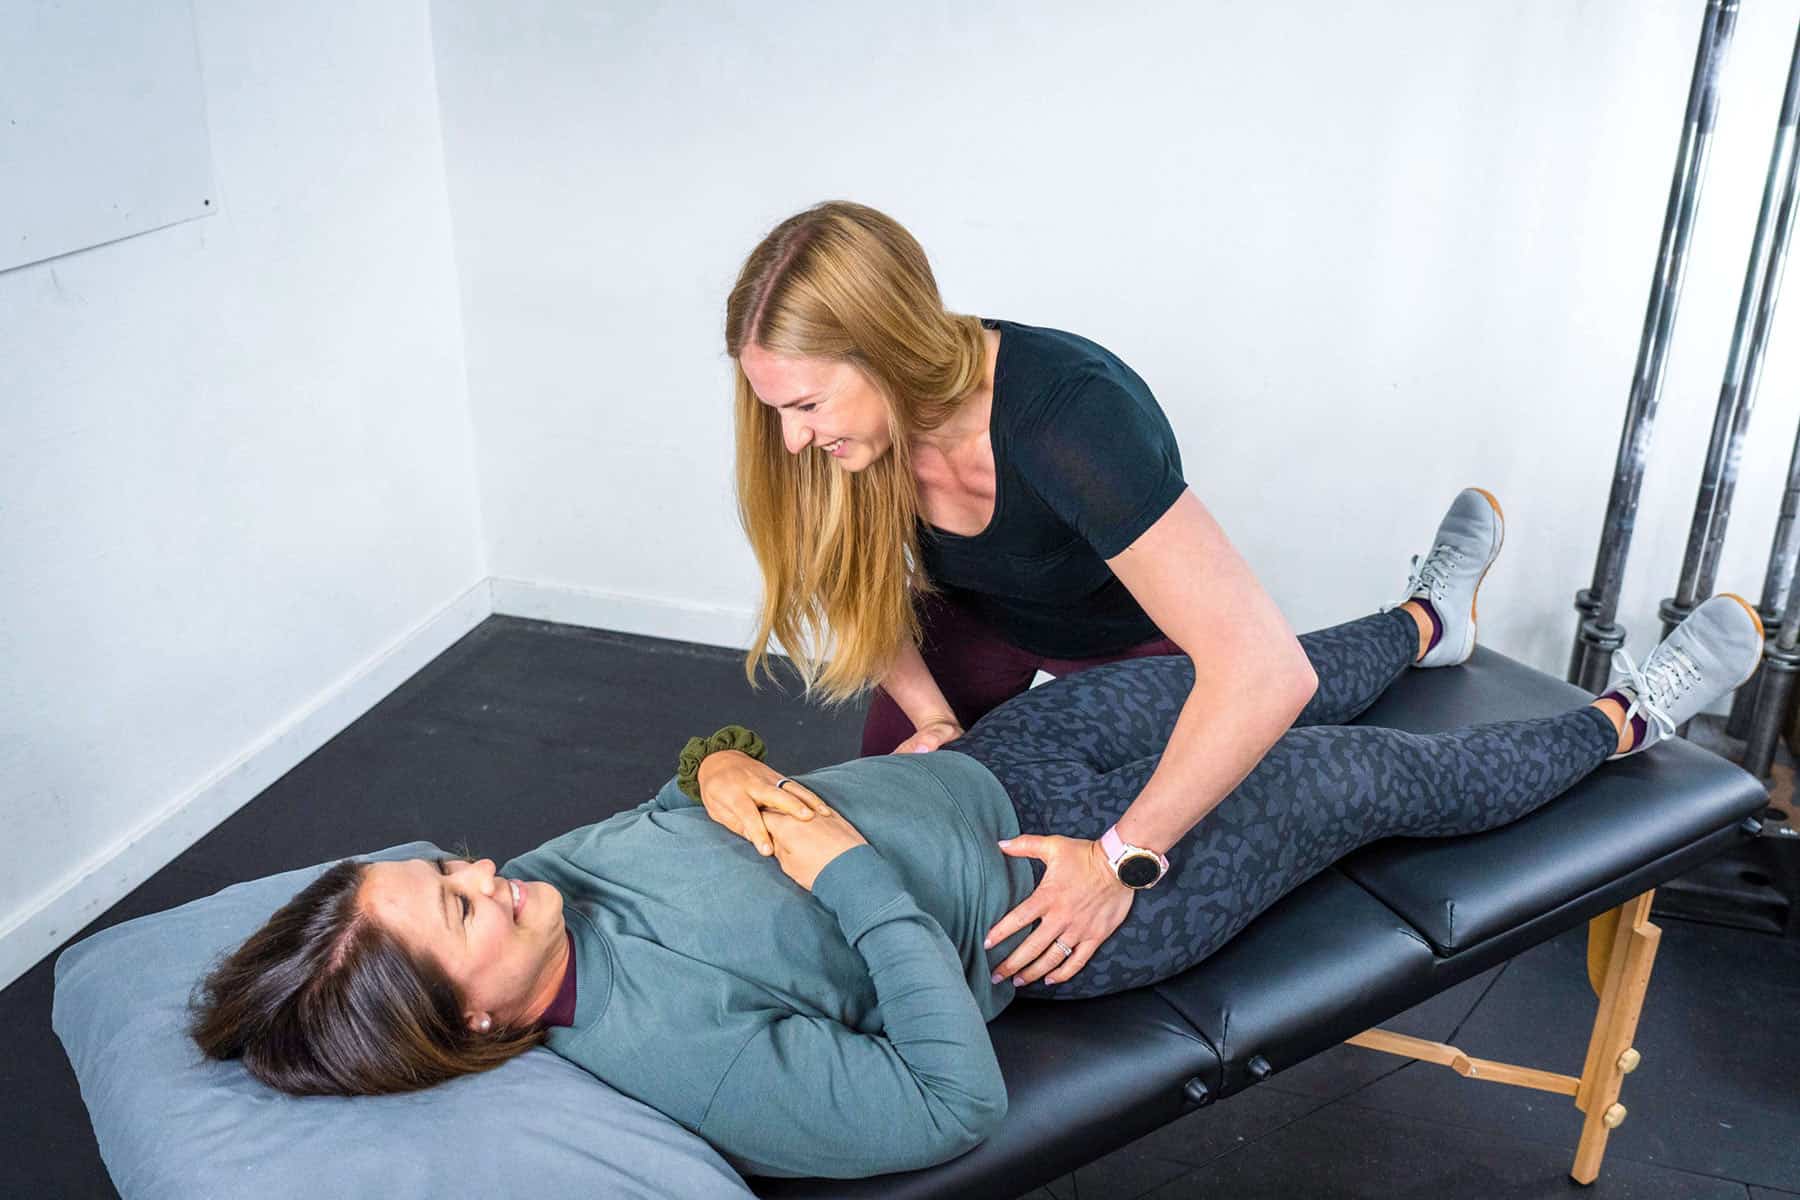 Women’s Health | Onward Physical Therapy